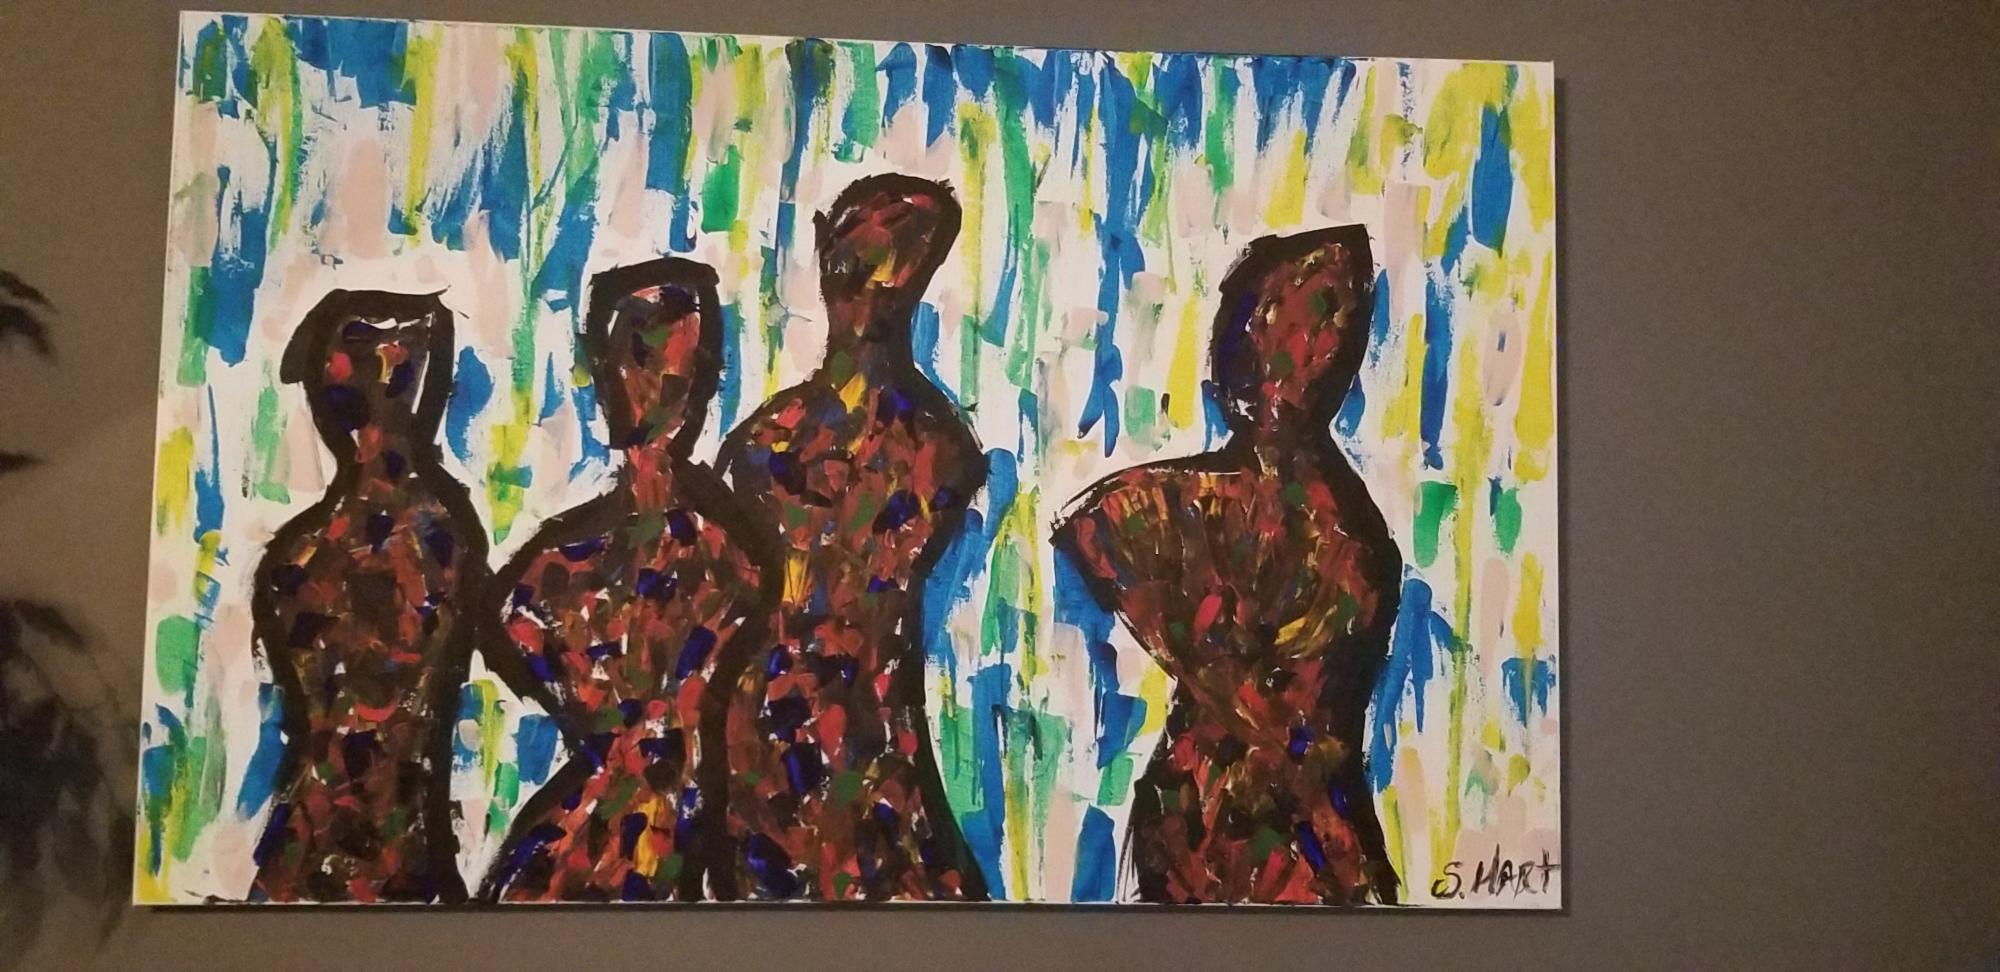 An abstracted group of four figures in shades of black and brown in front of a field of colors